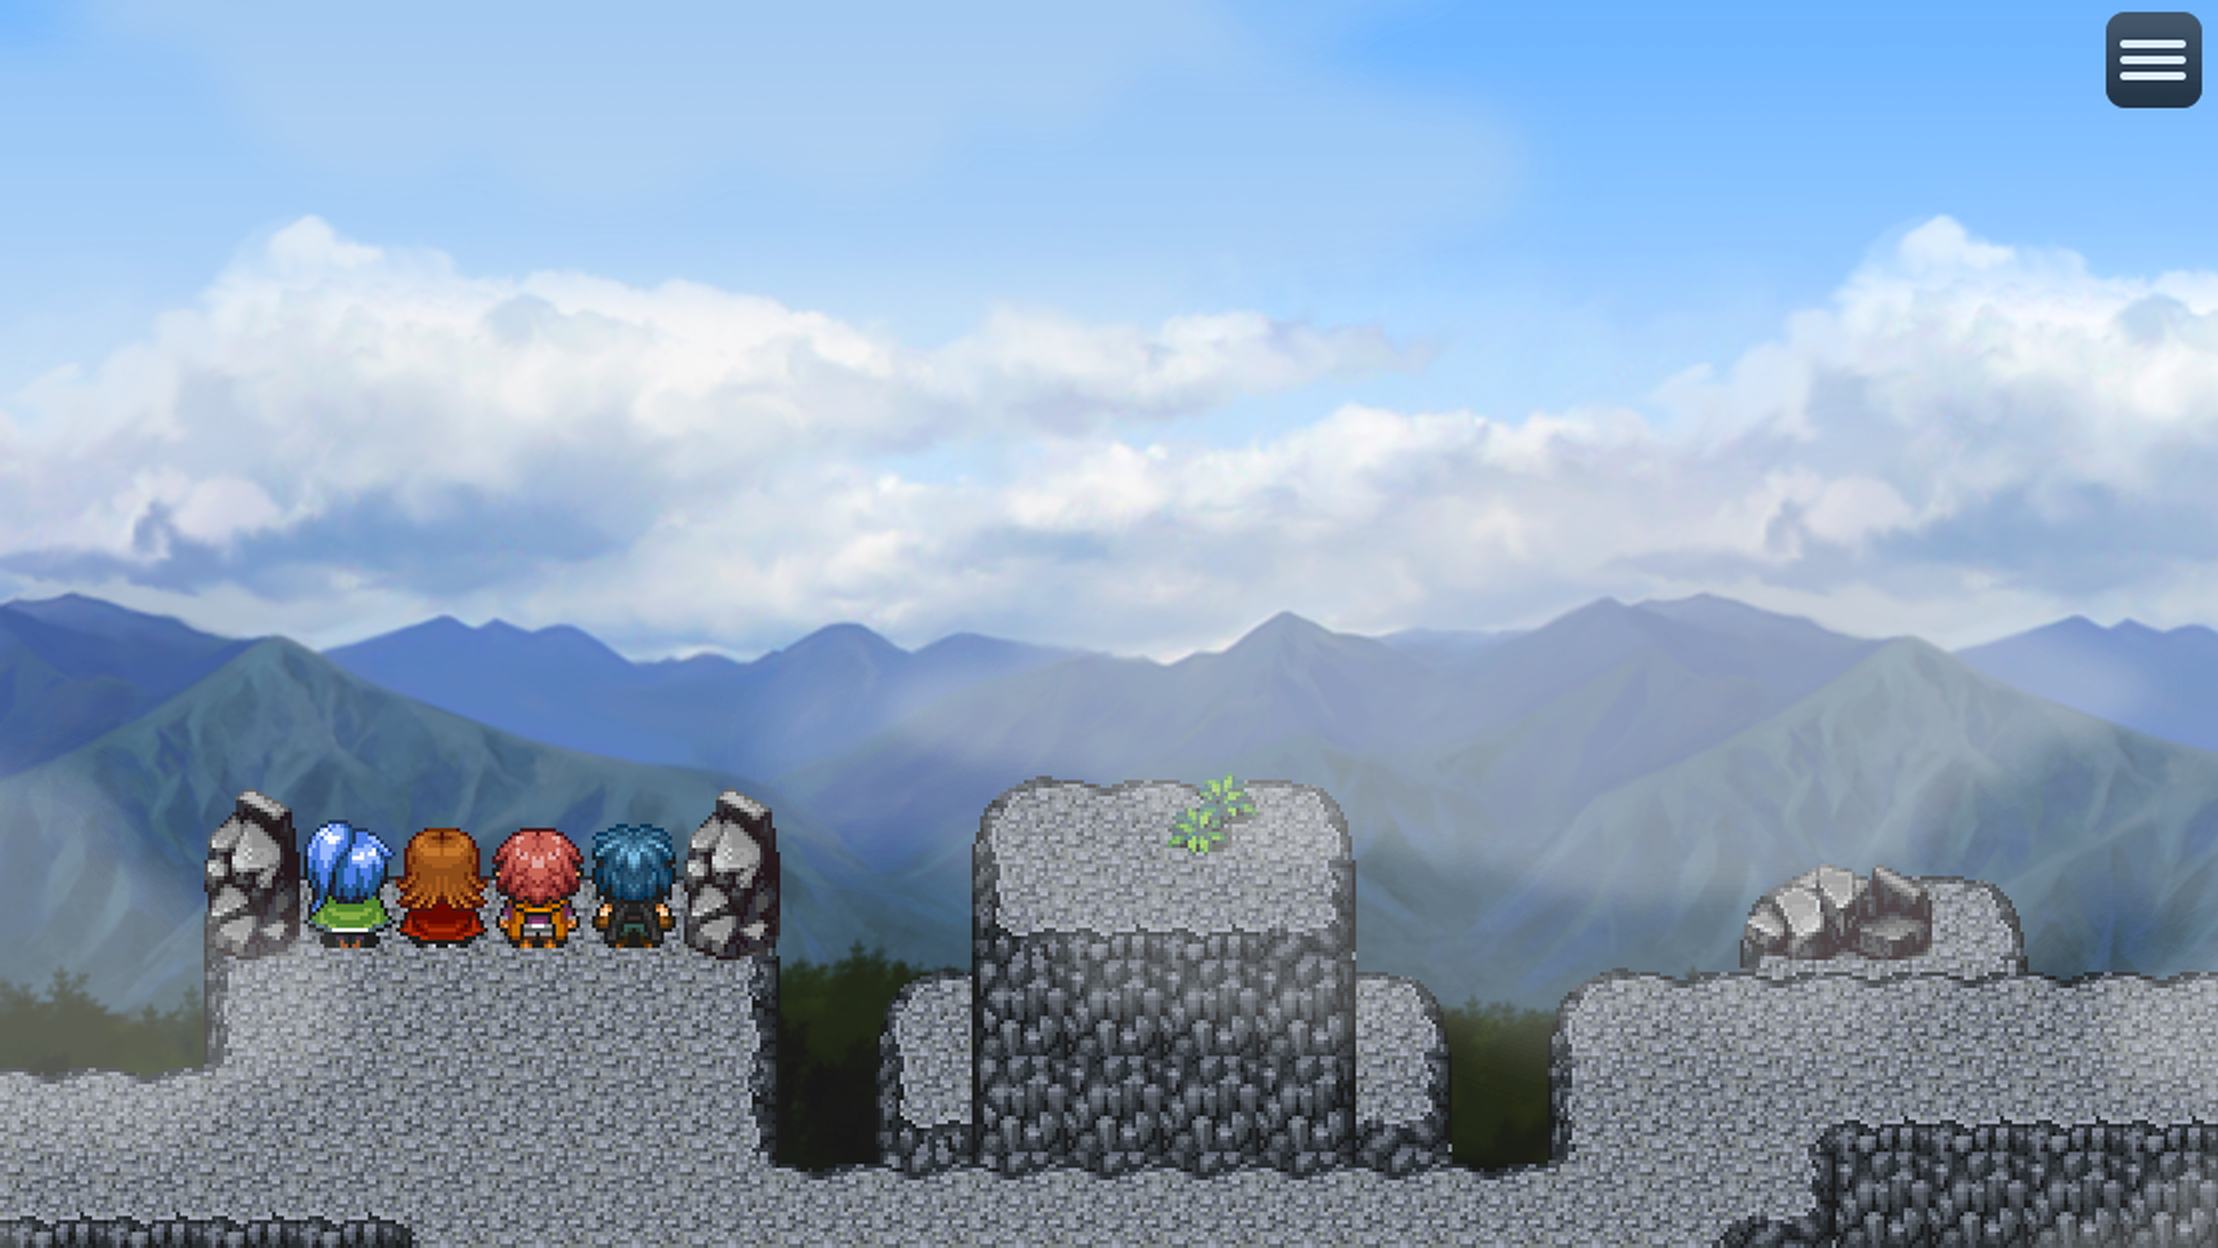 Screenshot 1 of Knight Bewitched: DX 에디션 